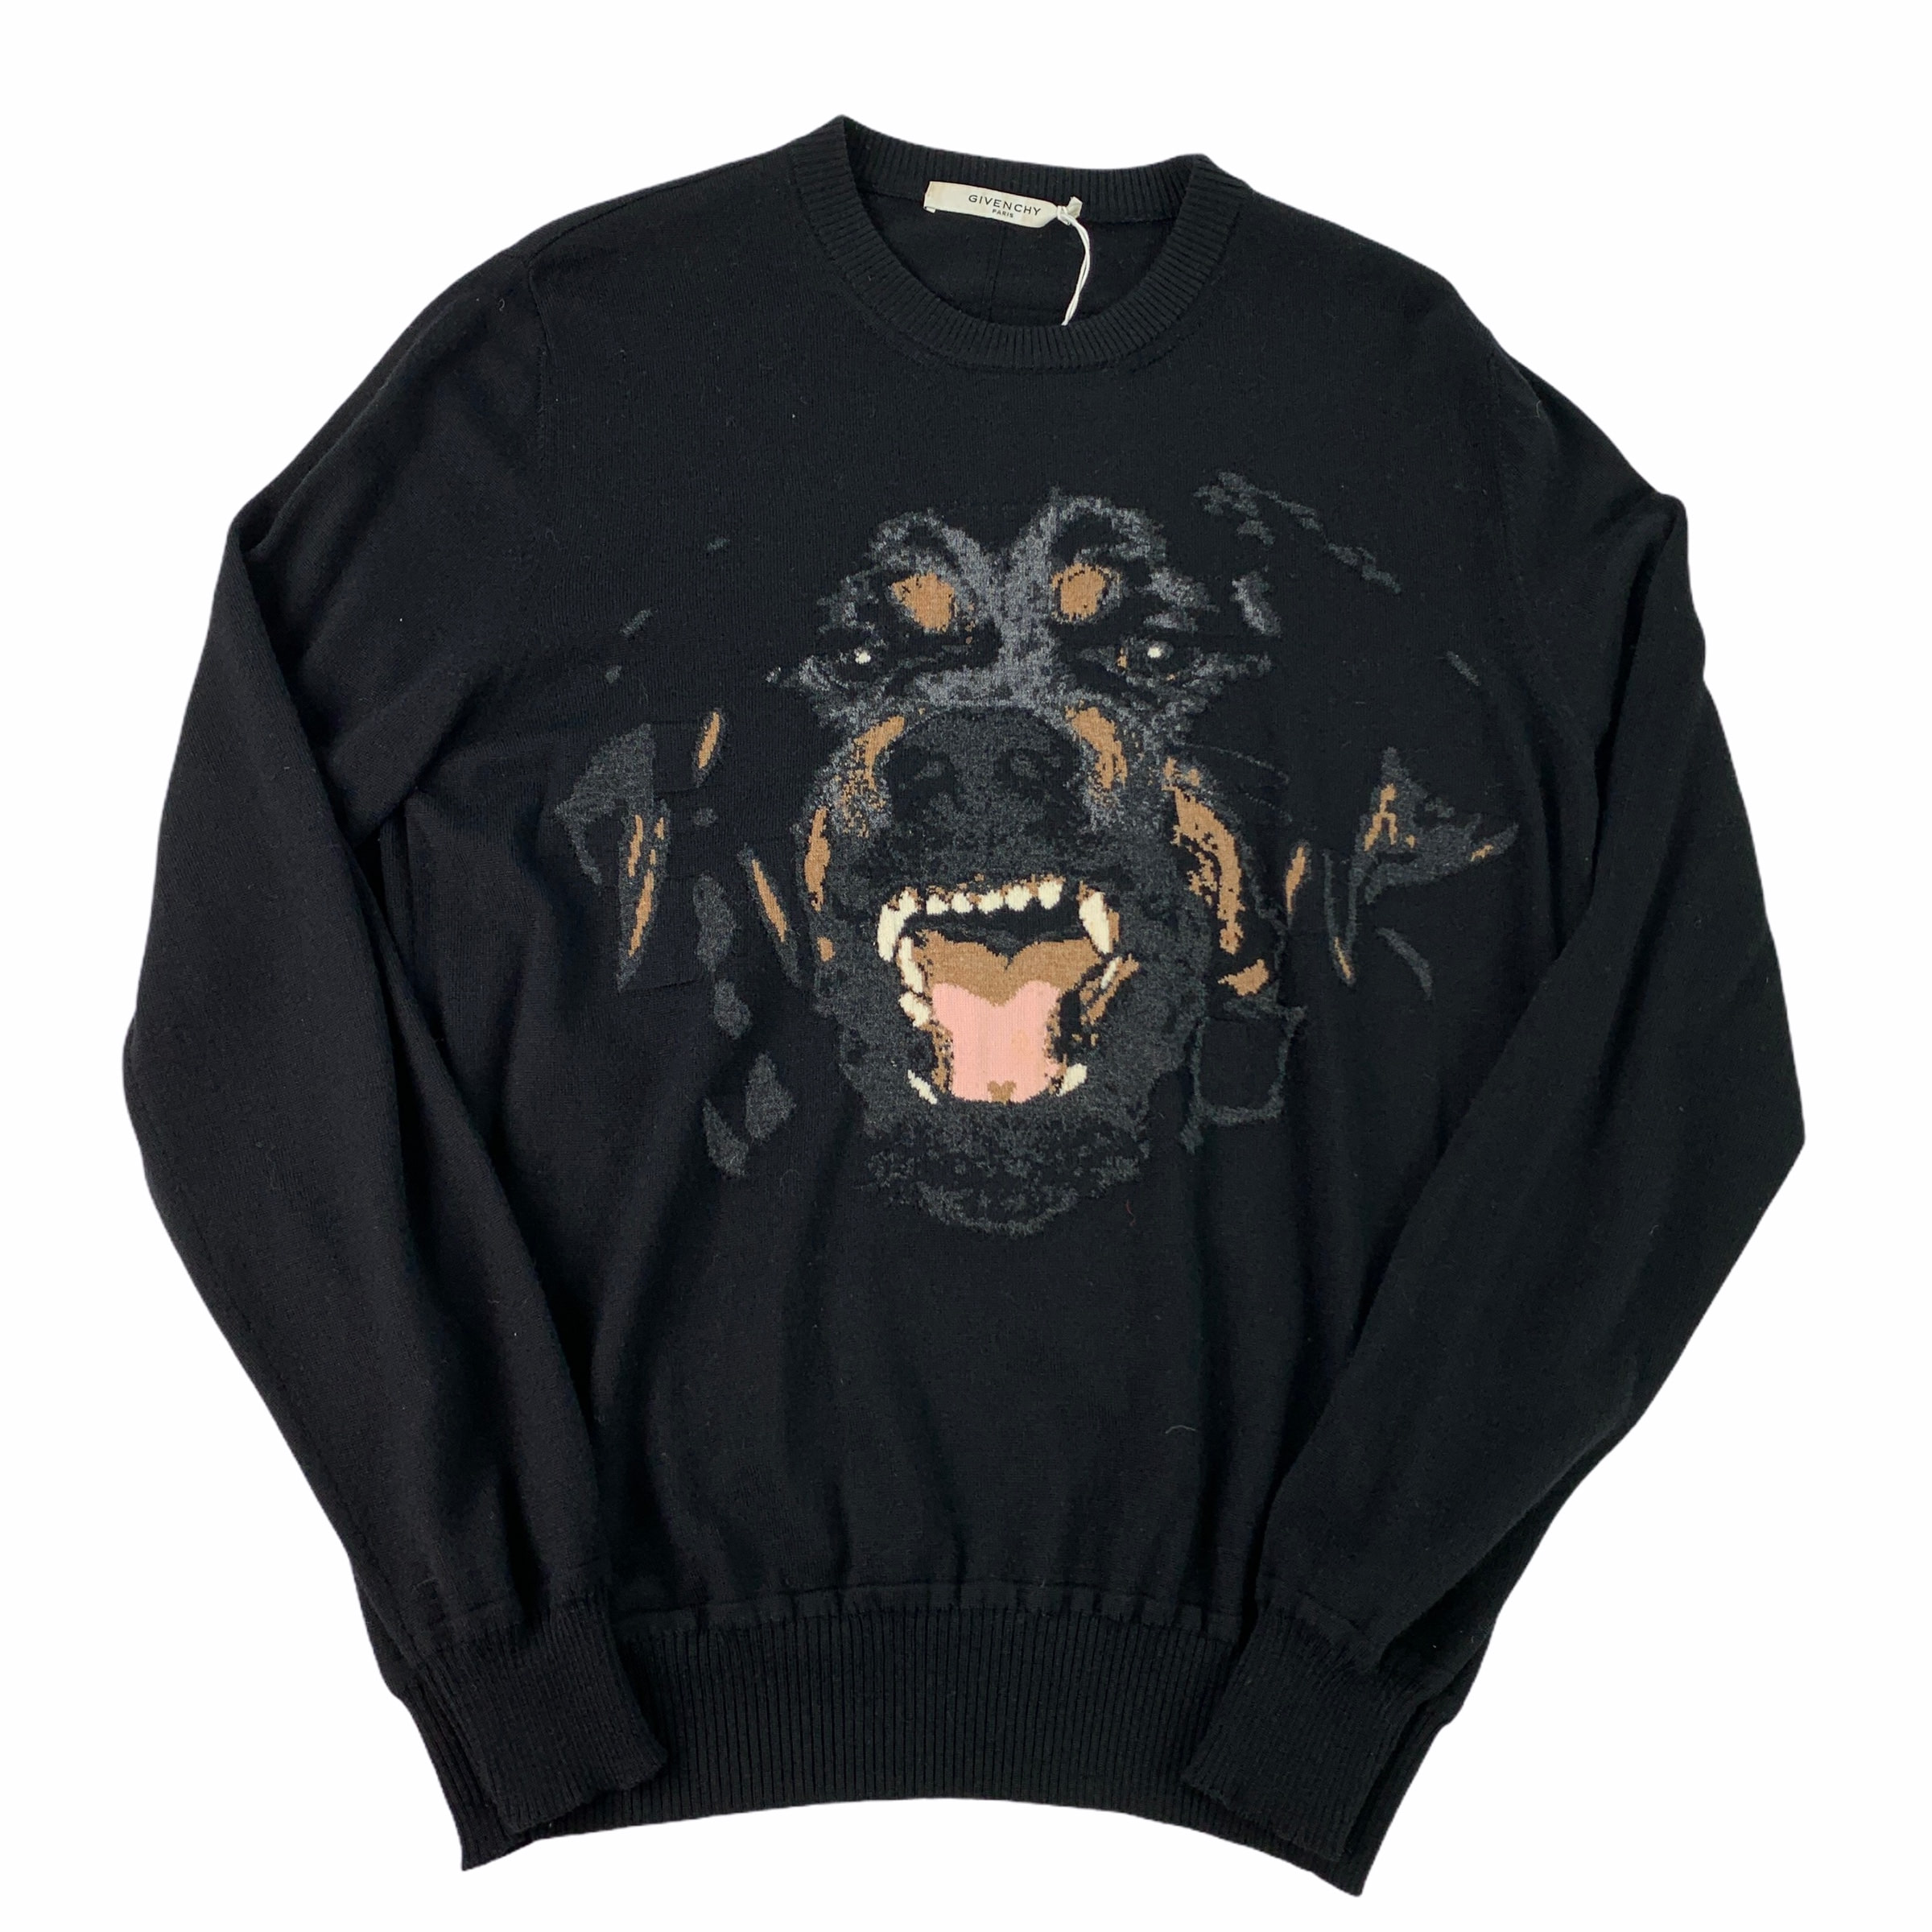 [Givenchy] Rottweiler knit -  Size XL